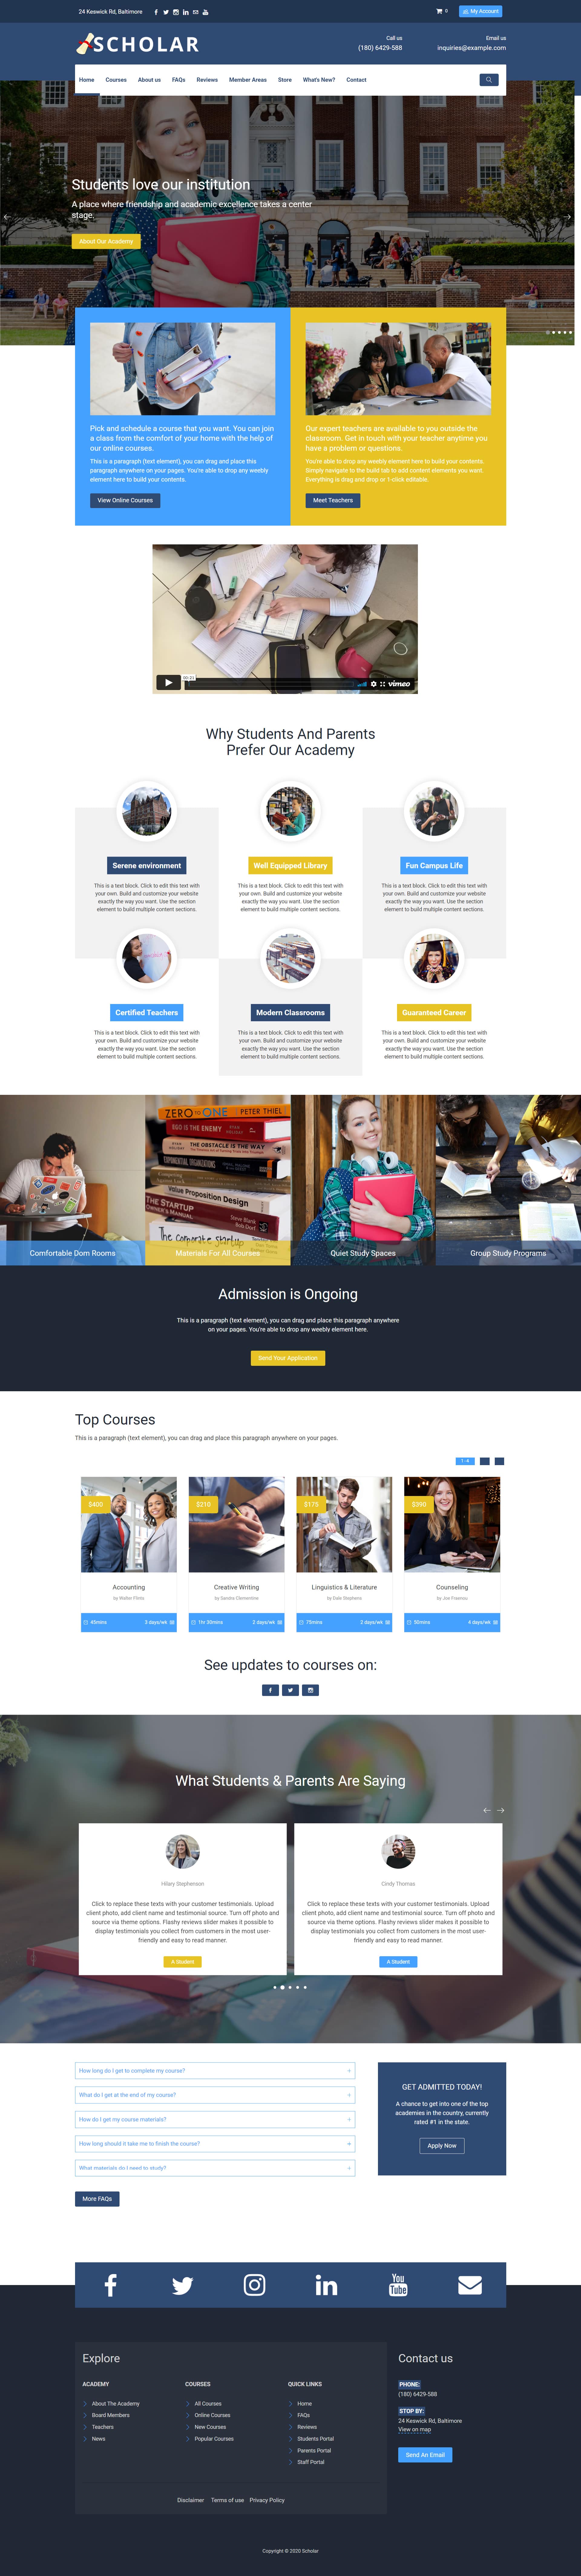 Scholar theme, weebly website template for education and tutoring services